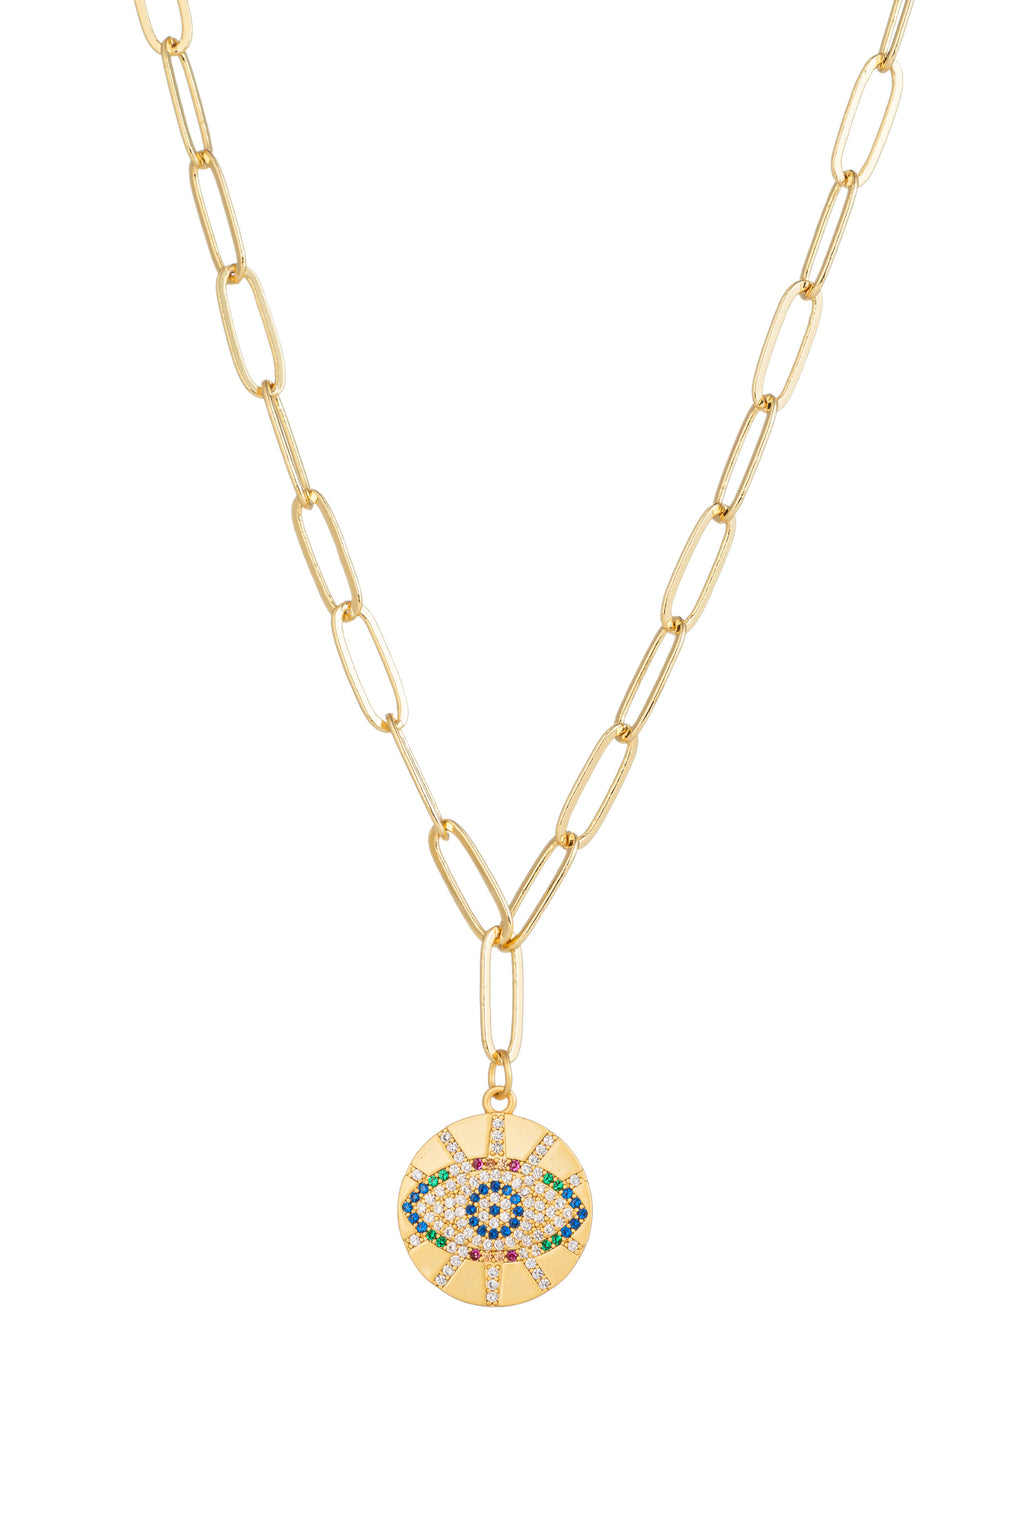 Evil eye titanium charm with CZ crystals on a gold chain link necklace.